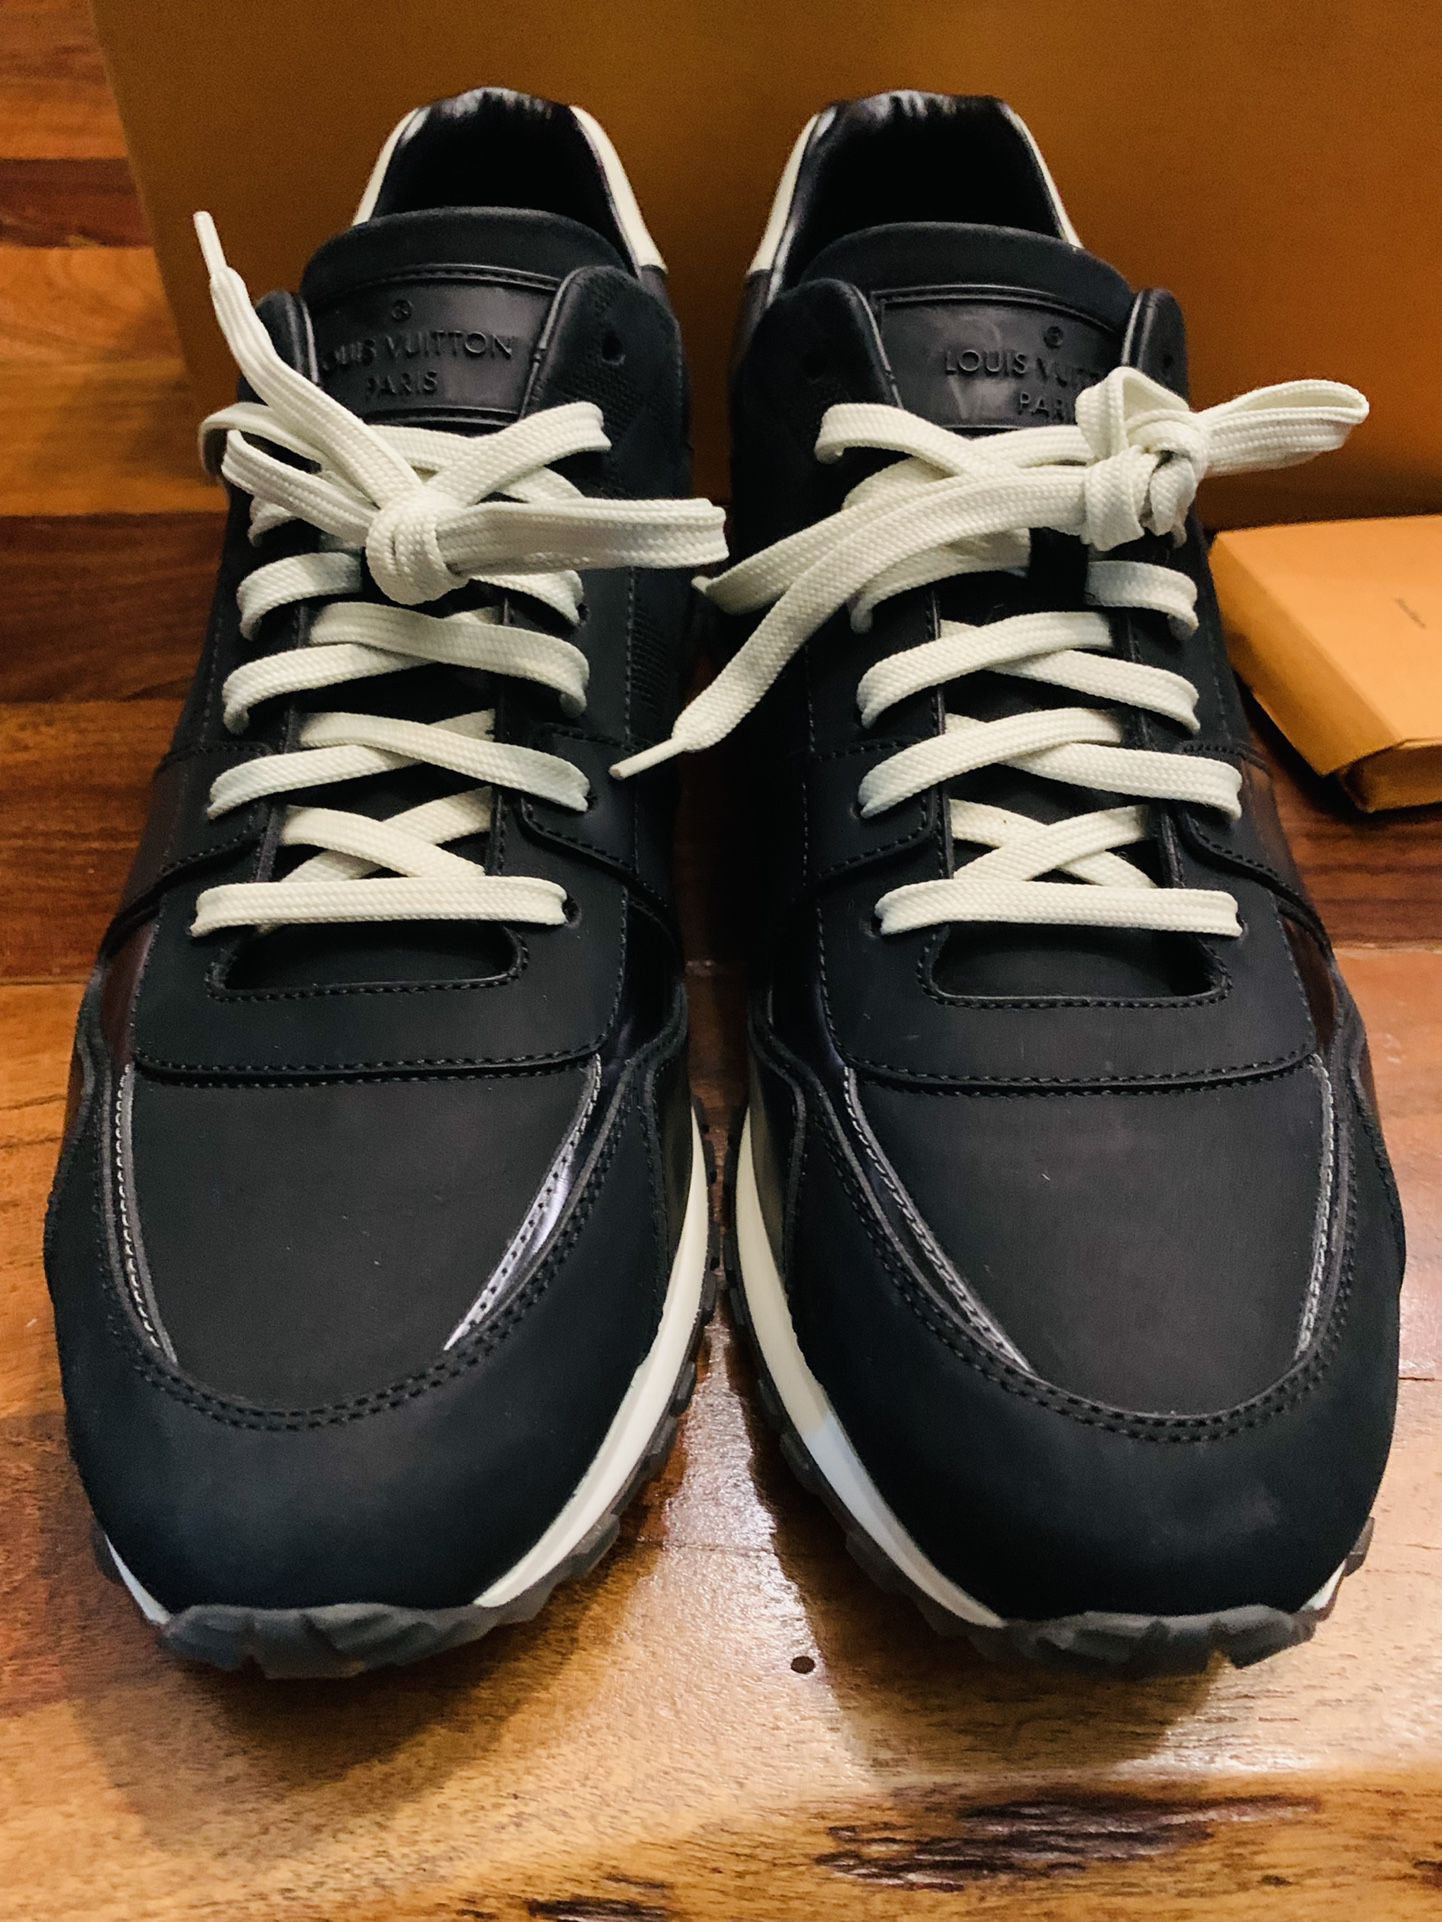 Luis Vuitton Men Run Away Sneaker Used Only Once!!! Retail: $1,020